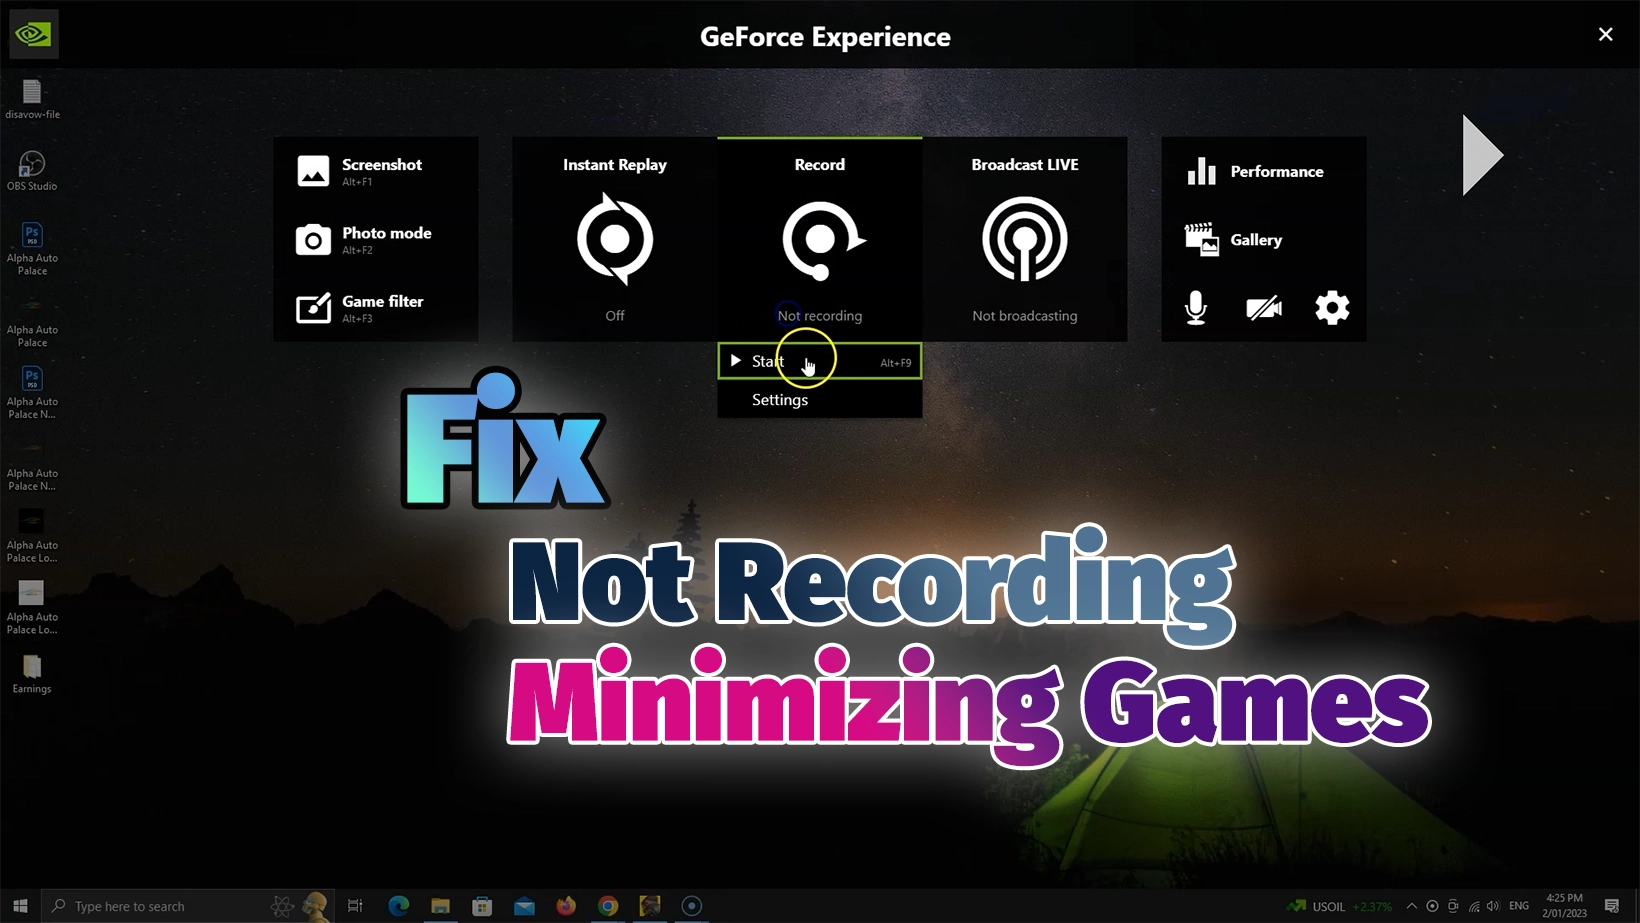 6 Ways to Fix ShadowPlay Minimizing Games or Not Recording